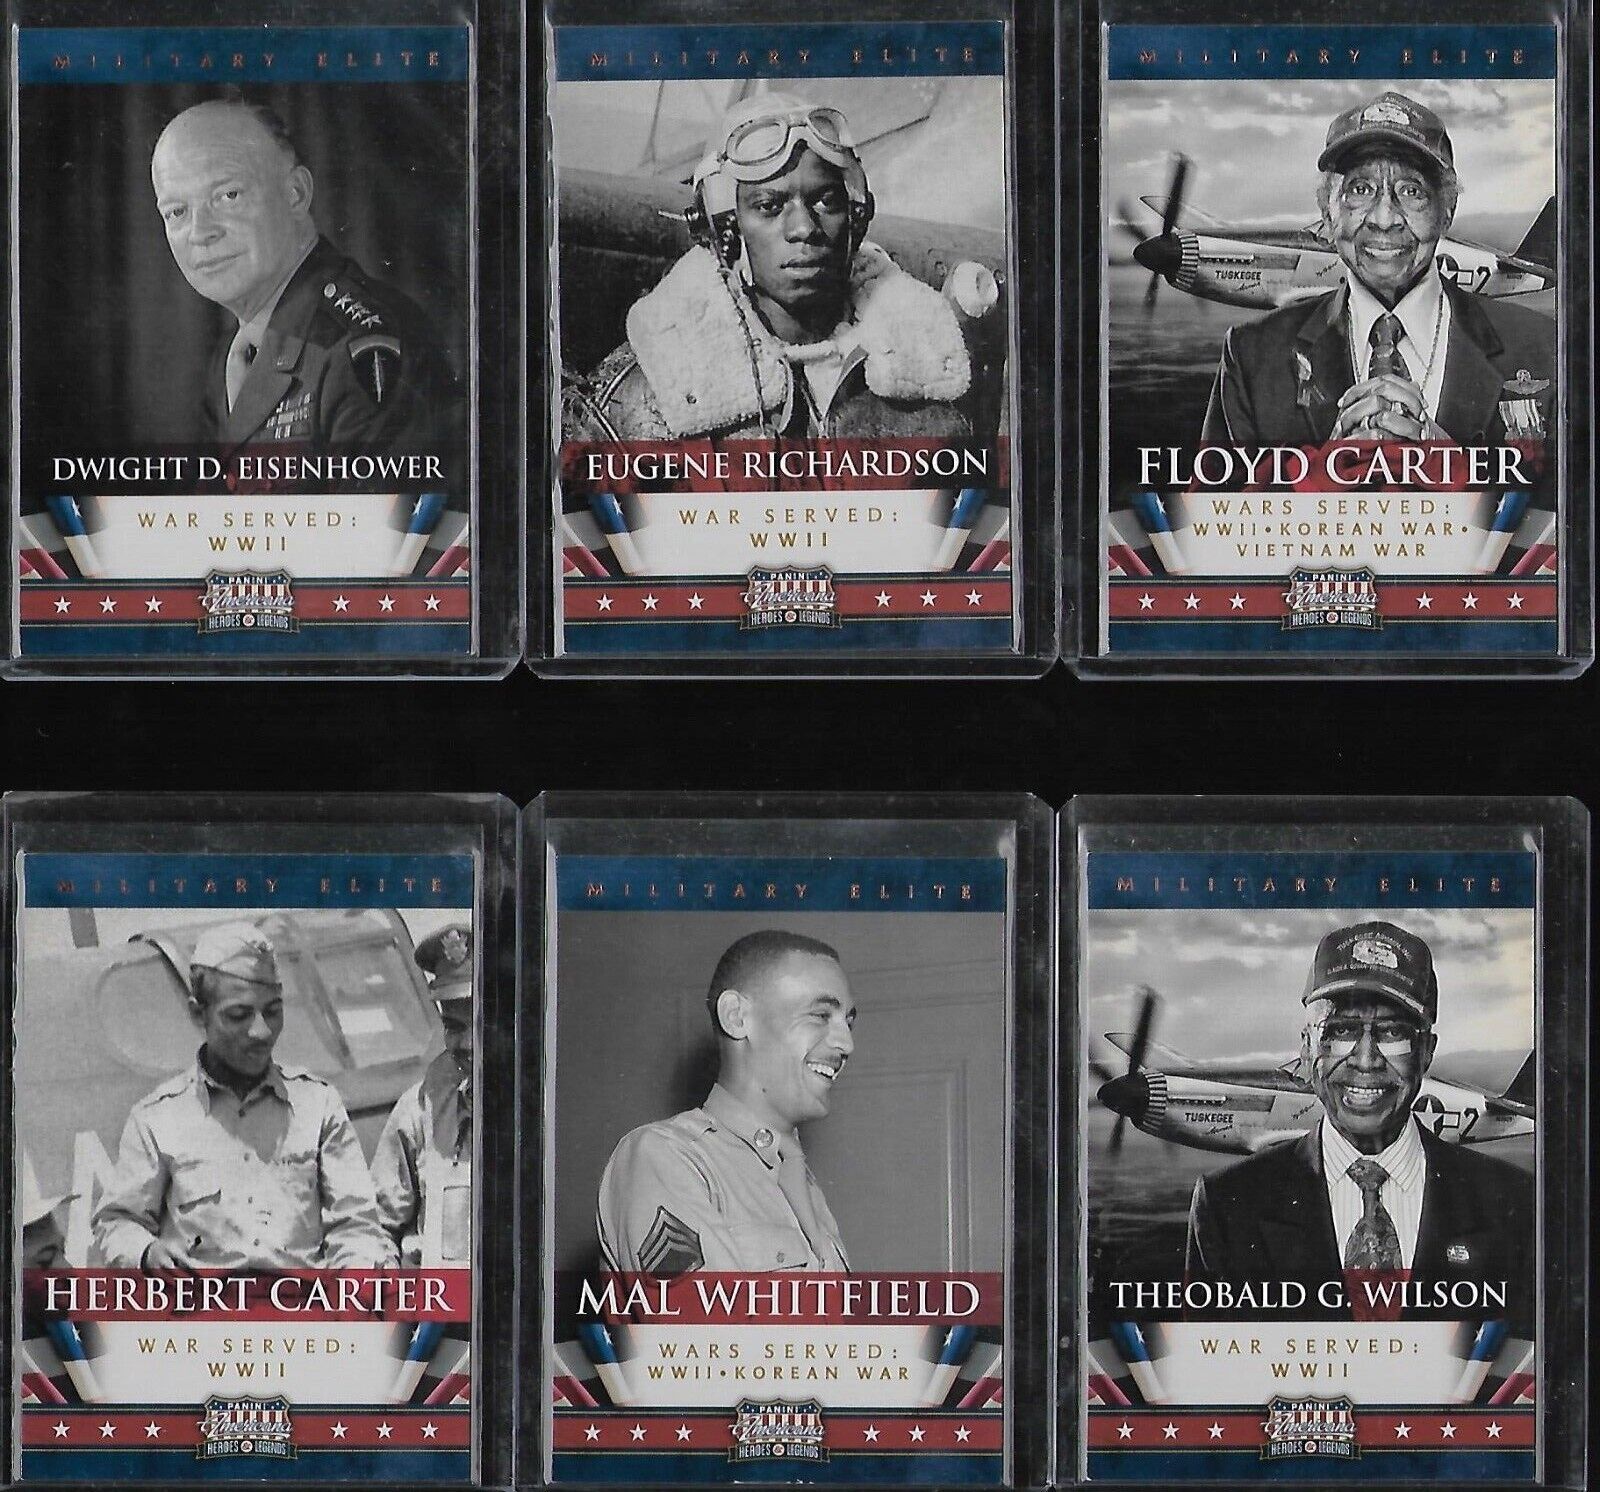 2012 Panini Americana Heroes Legends Military Elite $1 Ship Select Your Card